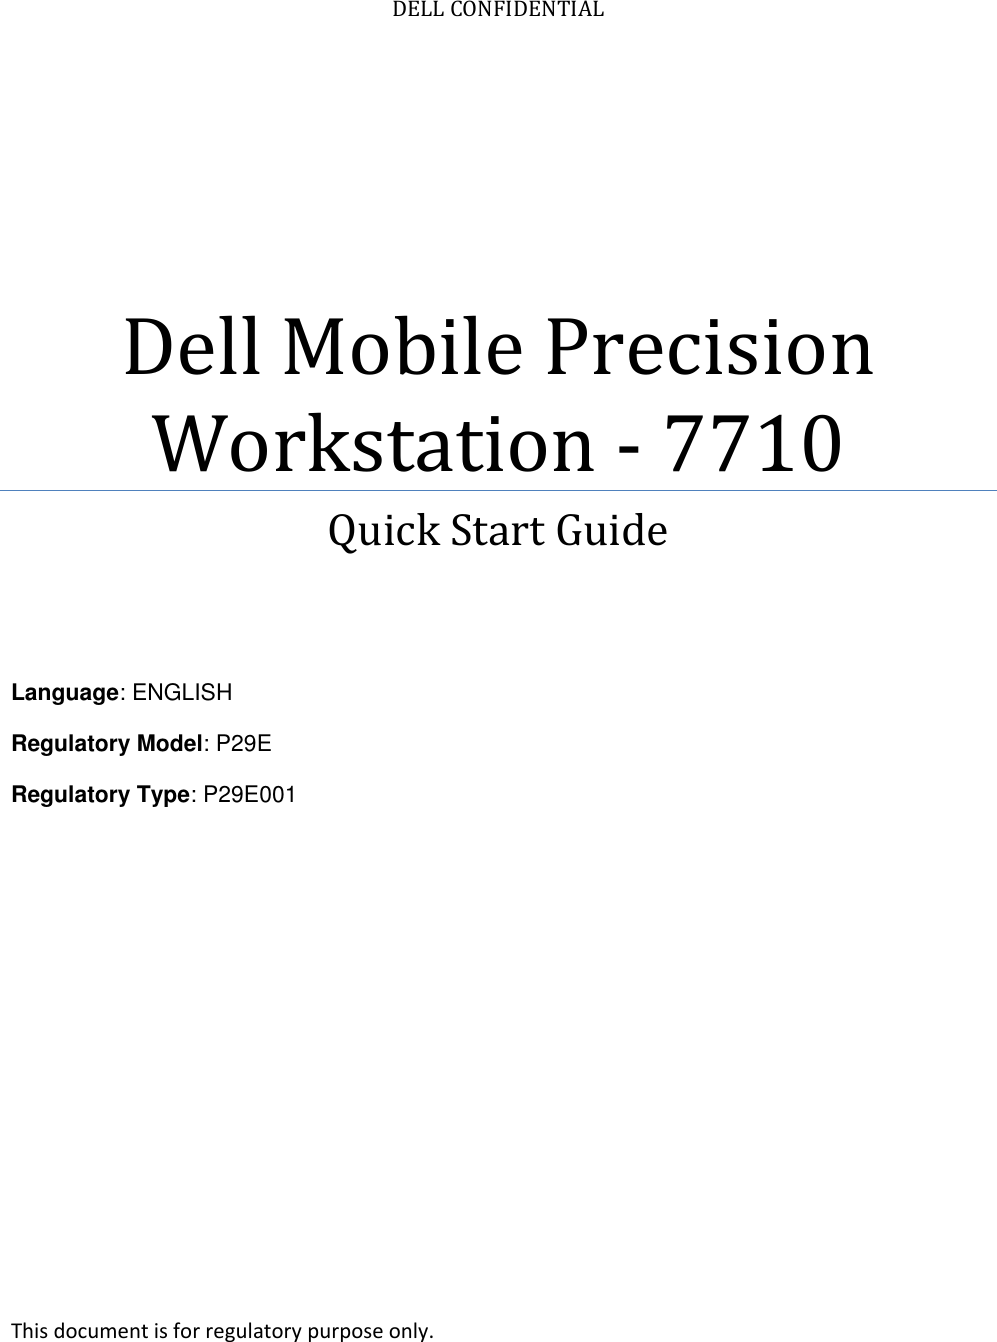 DELL CONFIDENTIAL Dell Mobile Precision Workstation - 7710 Quick Start Guide    Language: ENGLISH Regulatory Model: P29E Regulatory Type: P29E001      This document is for regulatory purpose only. 